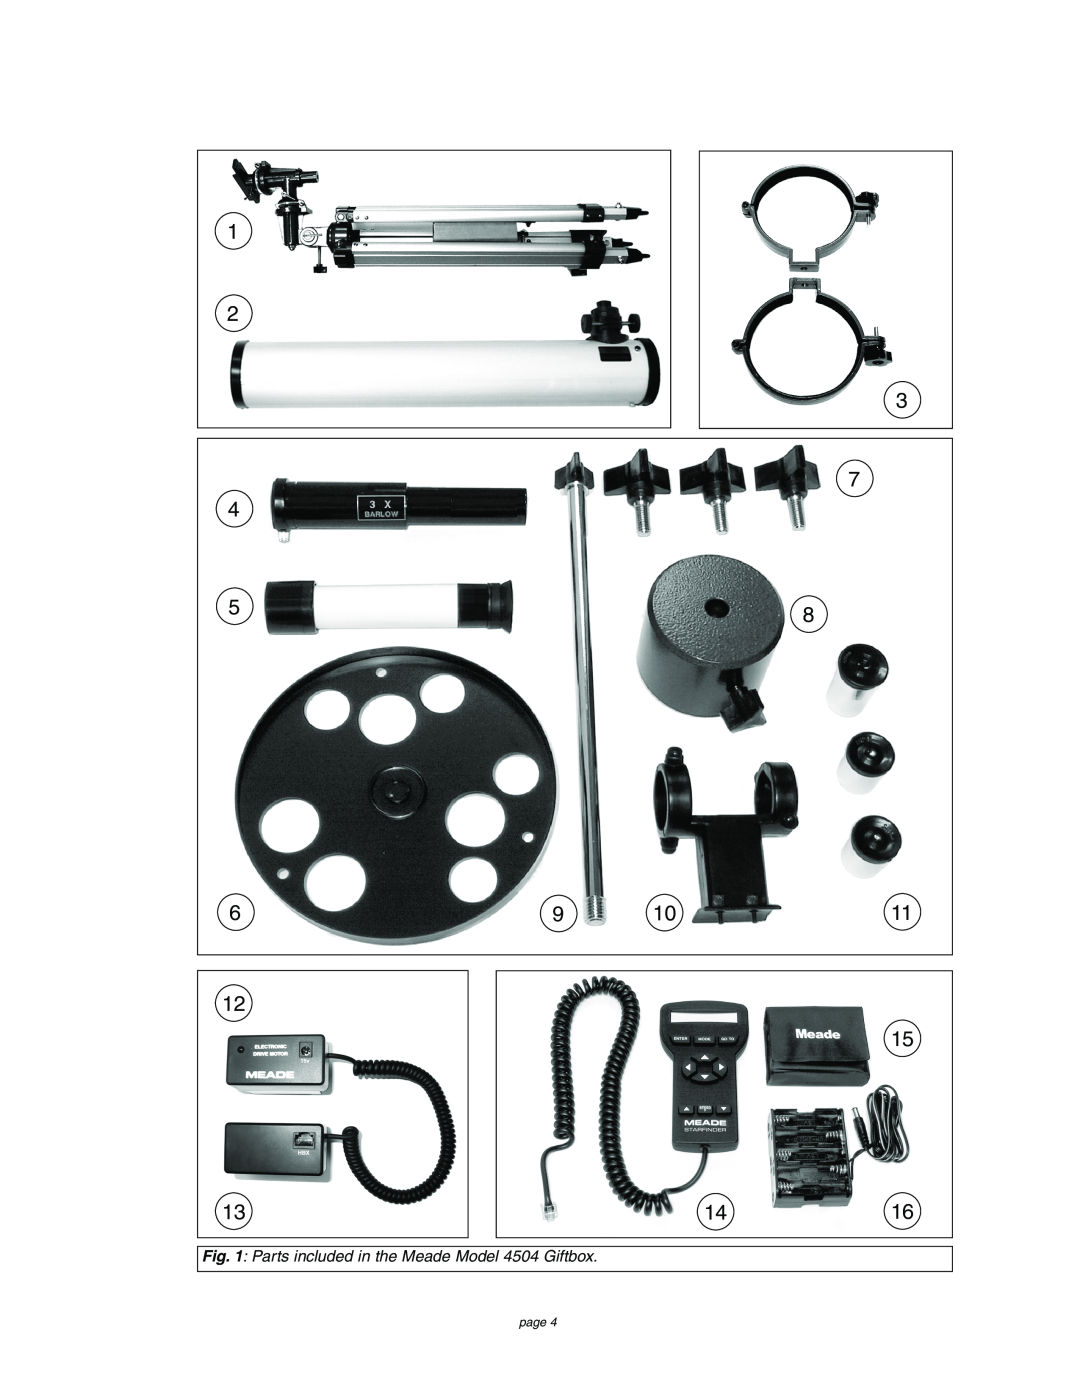 Meade instruction manual 1416, Parts included in the Meade Model 4504 Giftbox, page 